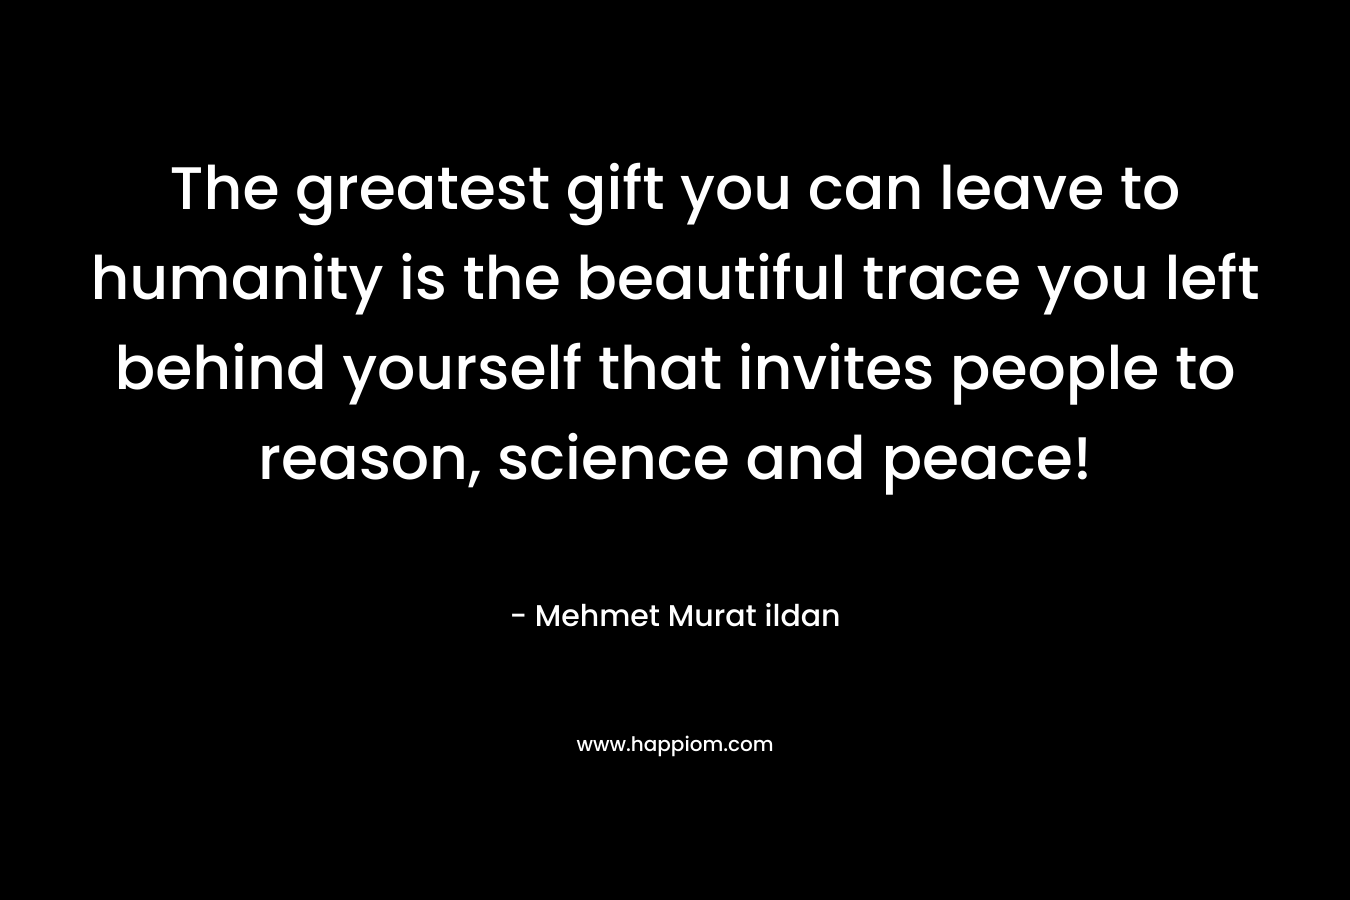 The greatest gift you can leave to humanity is the beautiful trace you left behind yourself that invites people to reason, science and peace!